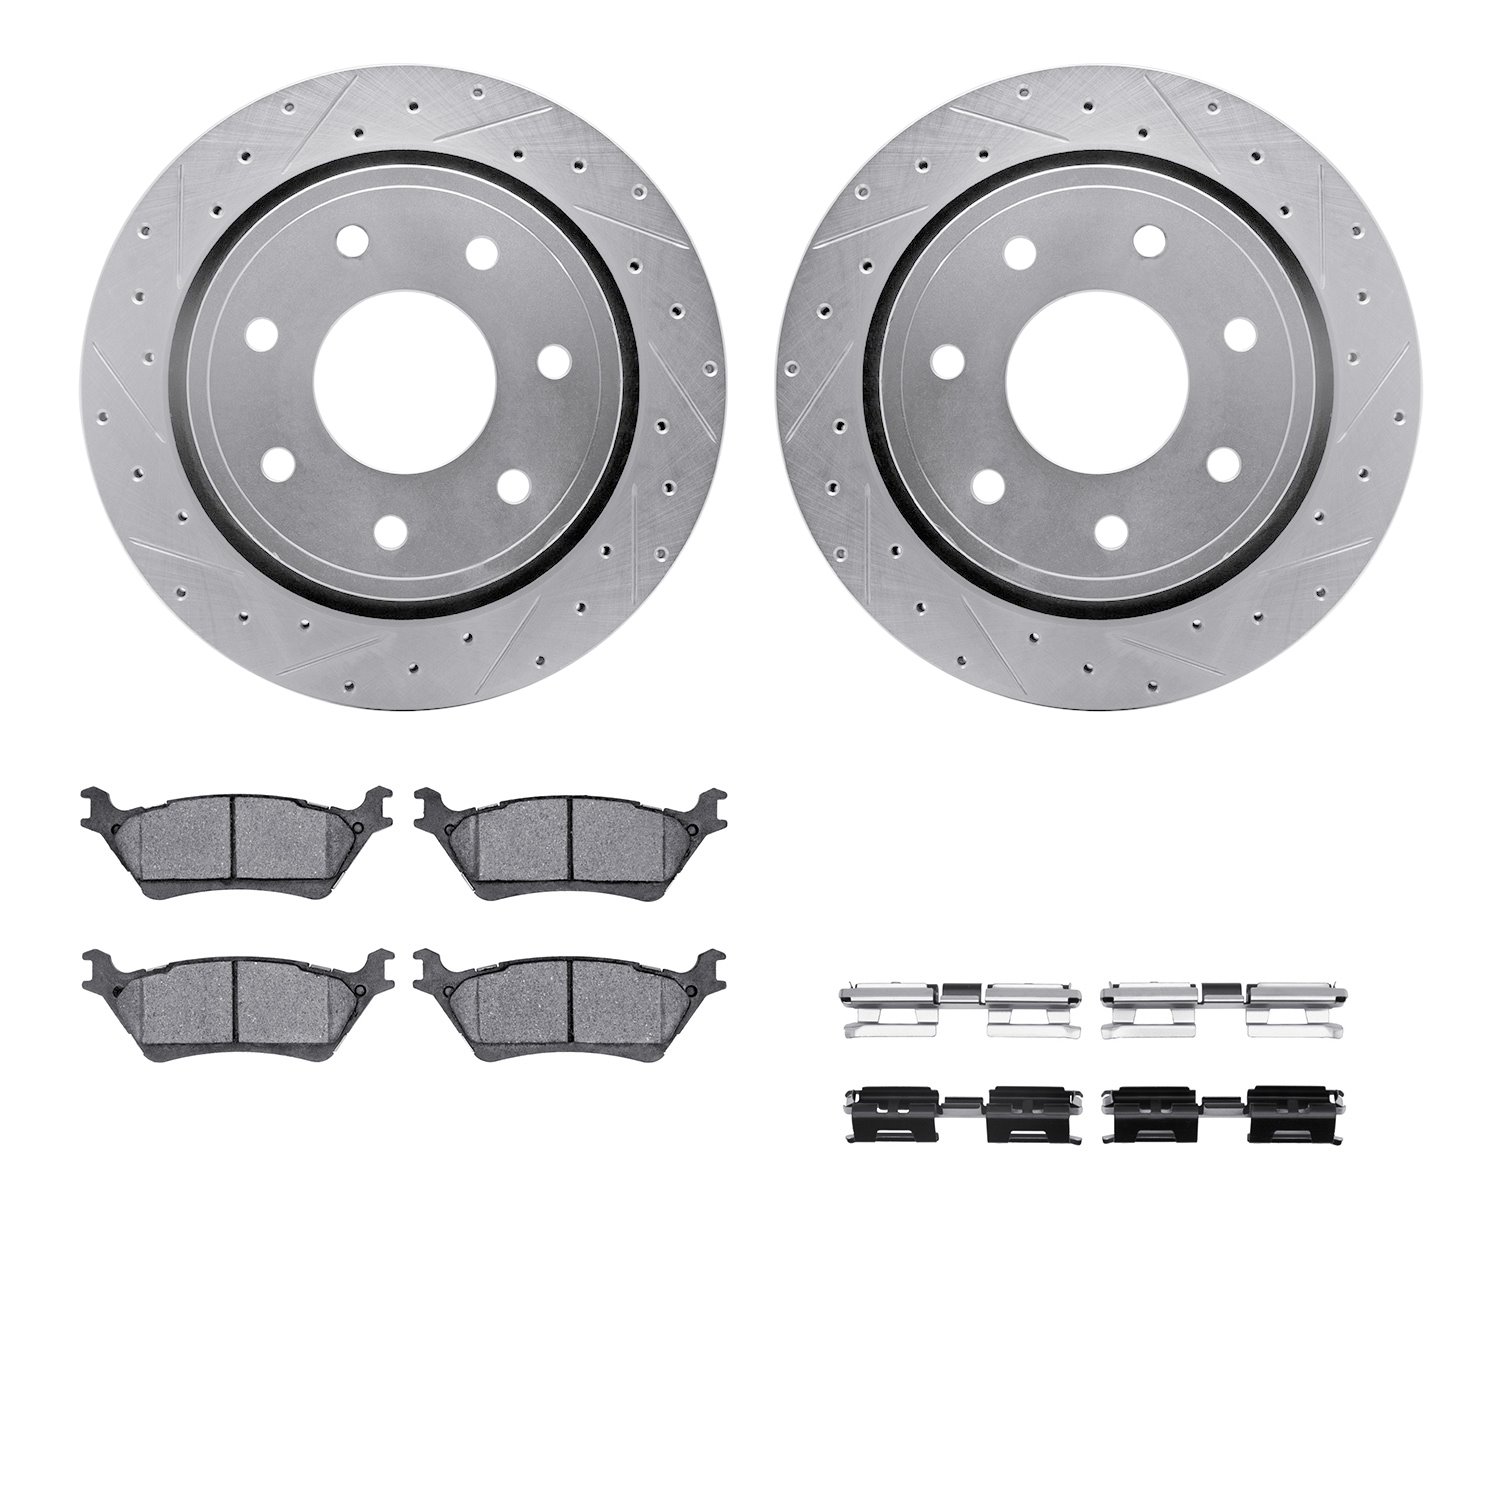 7412-54096 Drilled/Slotted Brake Rotors with Ultimate-Duty Brake Pads Kit & Hardware [Silver], 2012-2014 Ford/Lincoln/Mercury/Ma